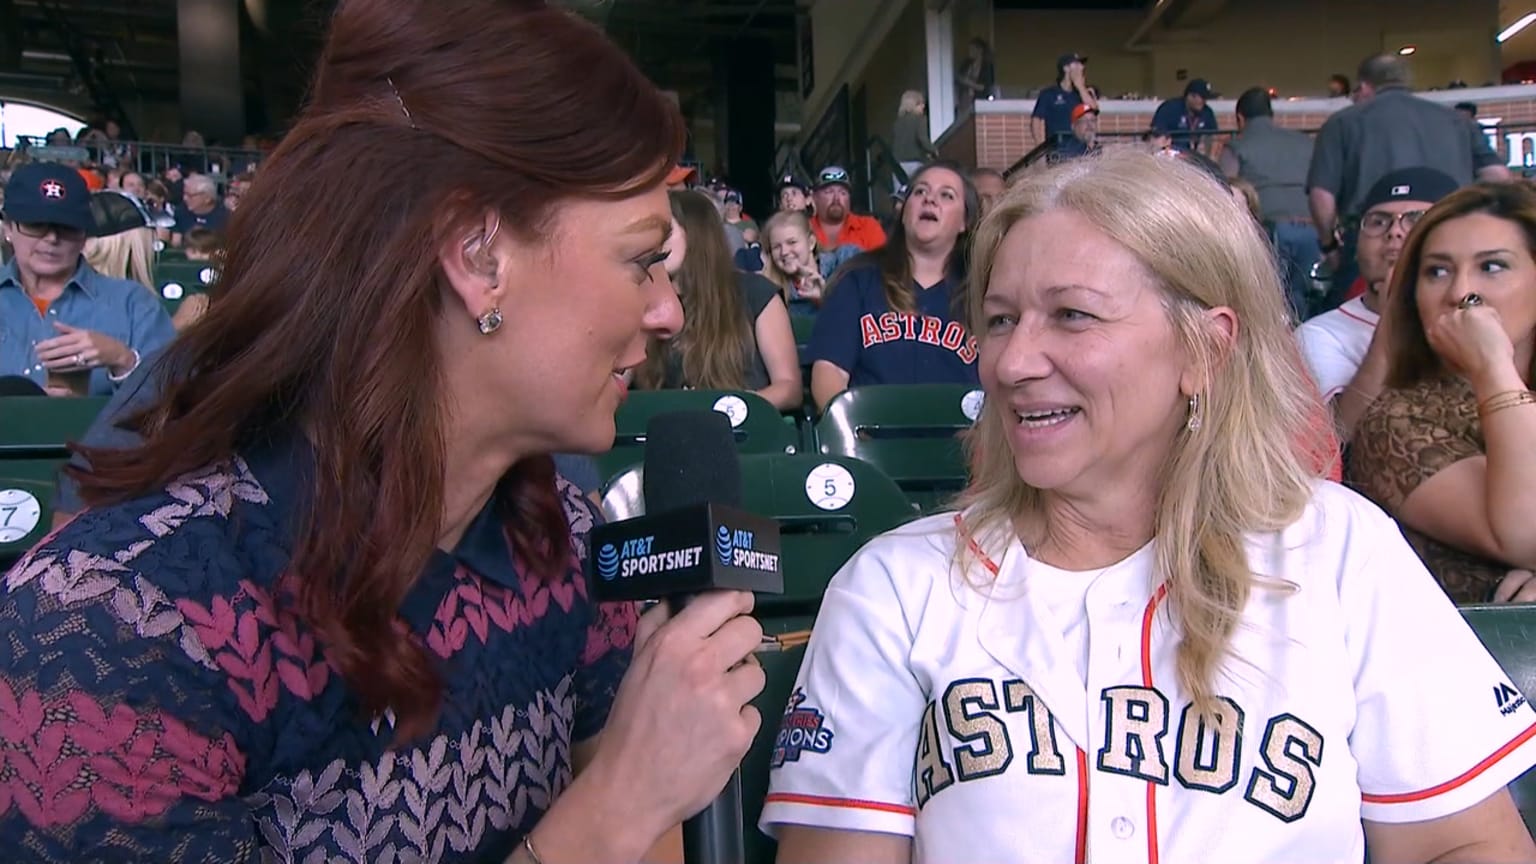 Young girl with 'Mrs. Bregman' jersey captures attention of Astros player's  mother